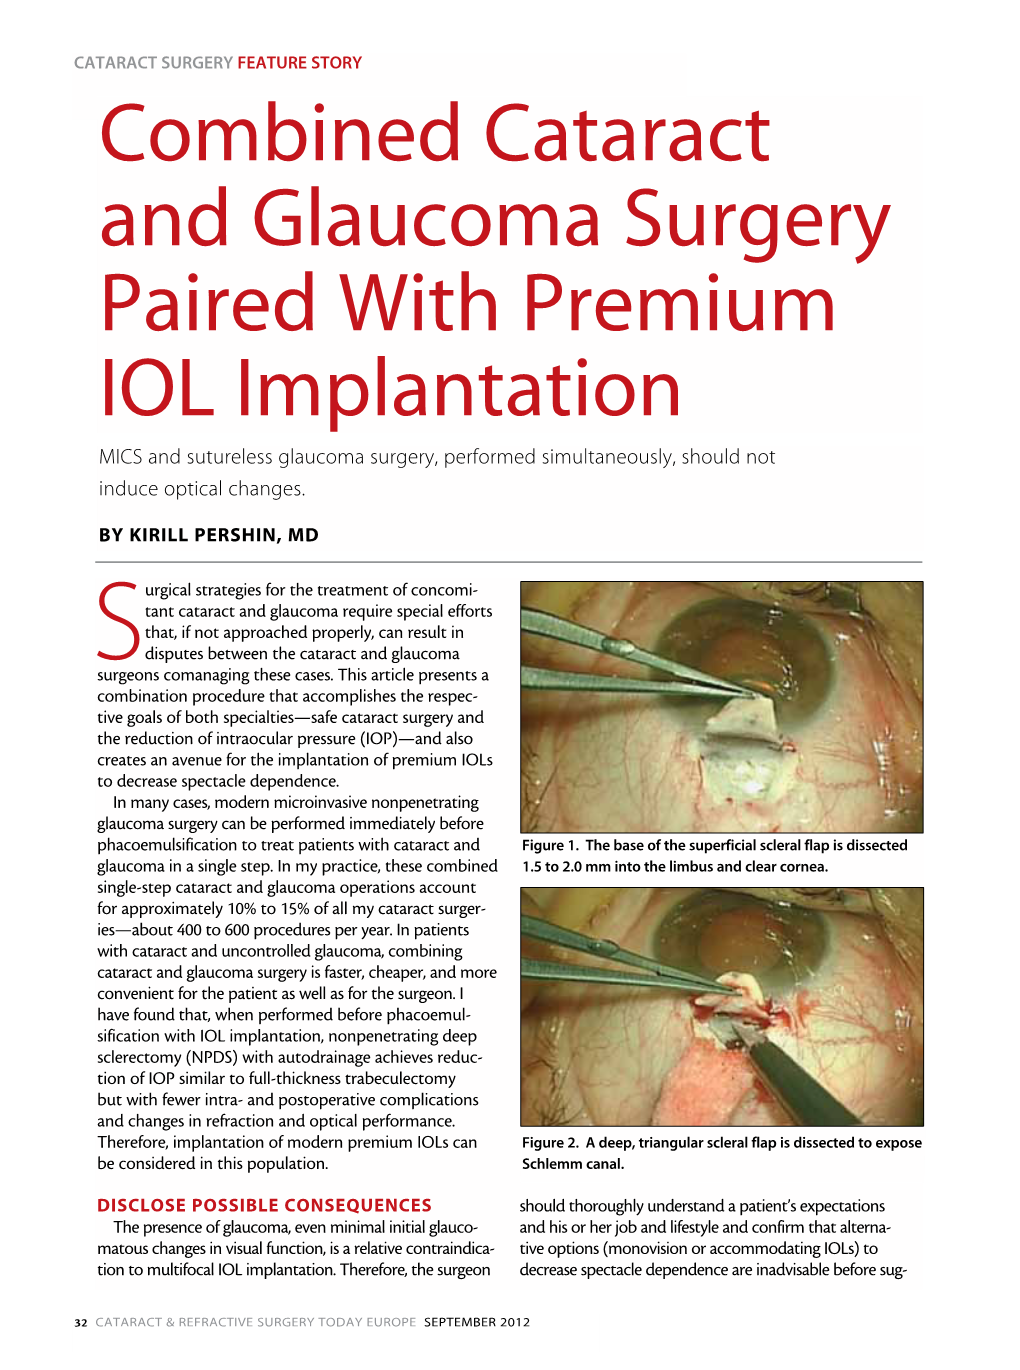 Combined Cataract and Glaucoma Surgery Paired with Premium IOL